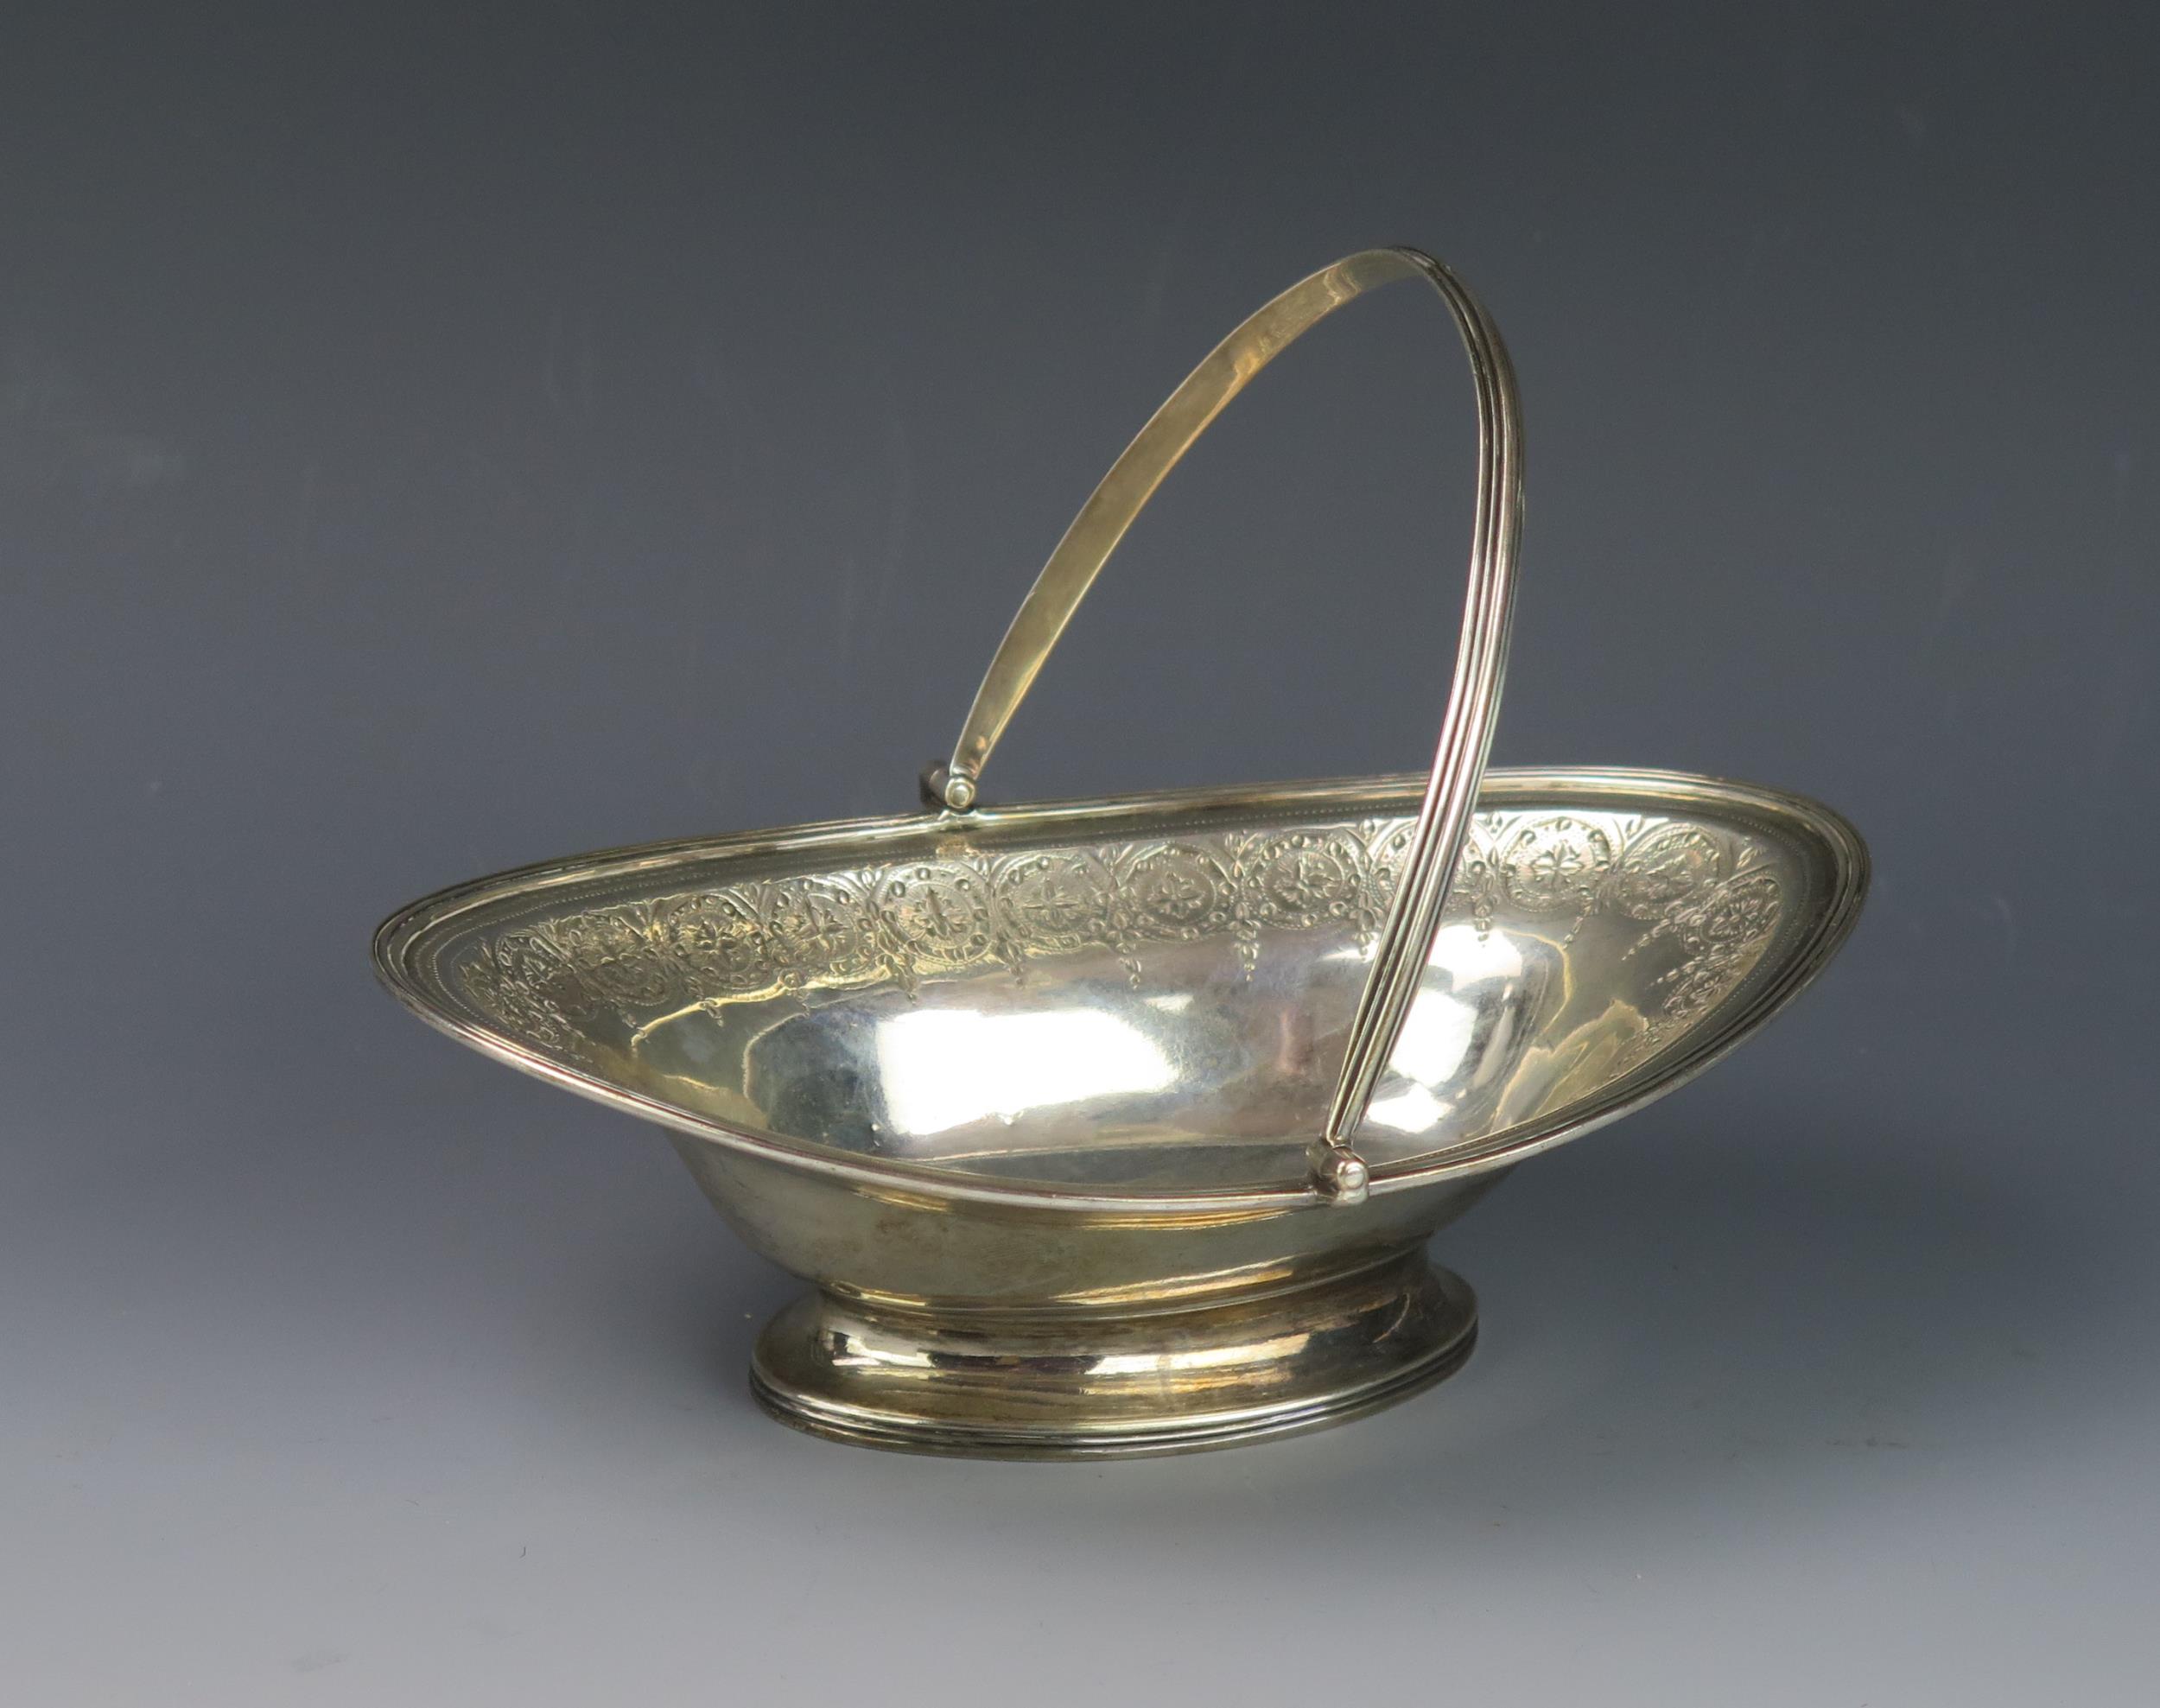 A George III silver swing handled sweetmeat dish, maker Henry Chawner, London, 1791, monogrammed, of